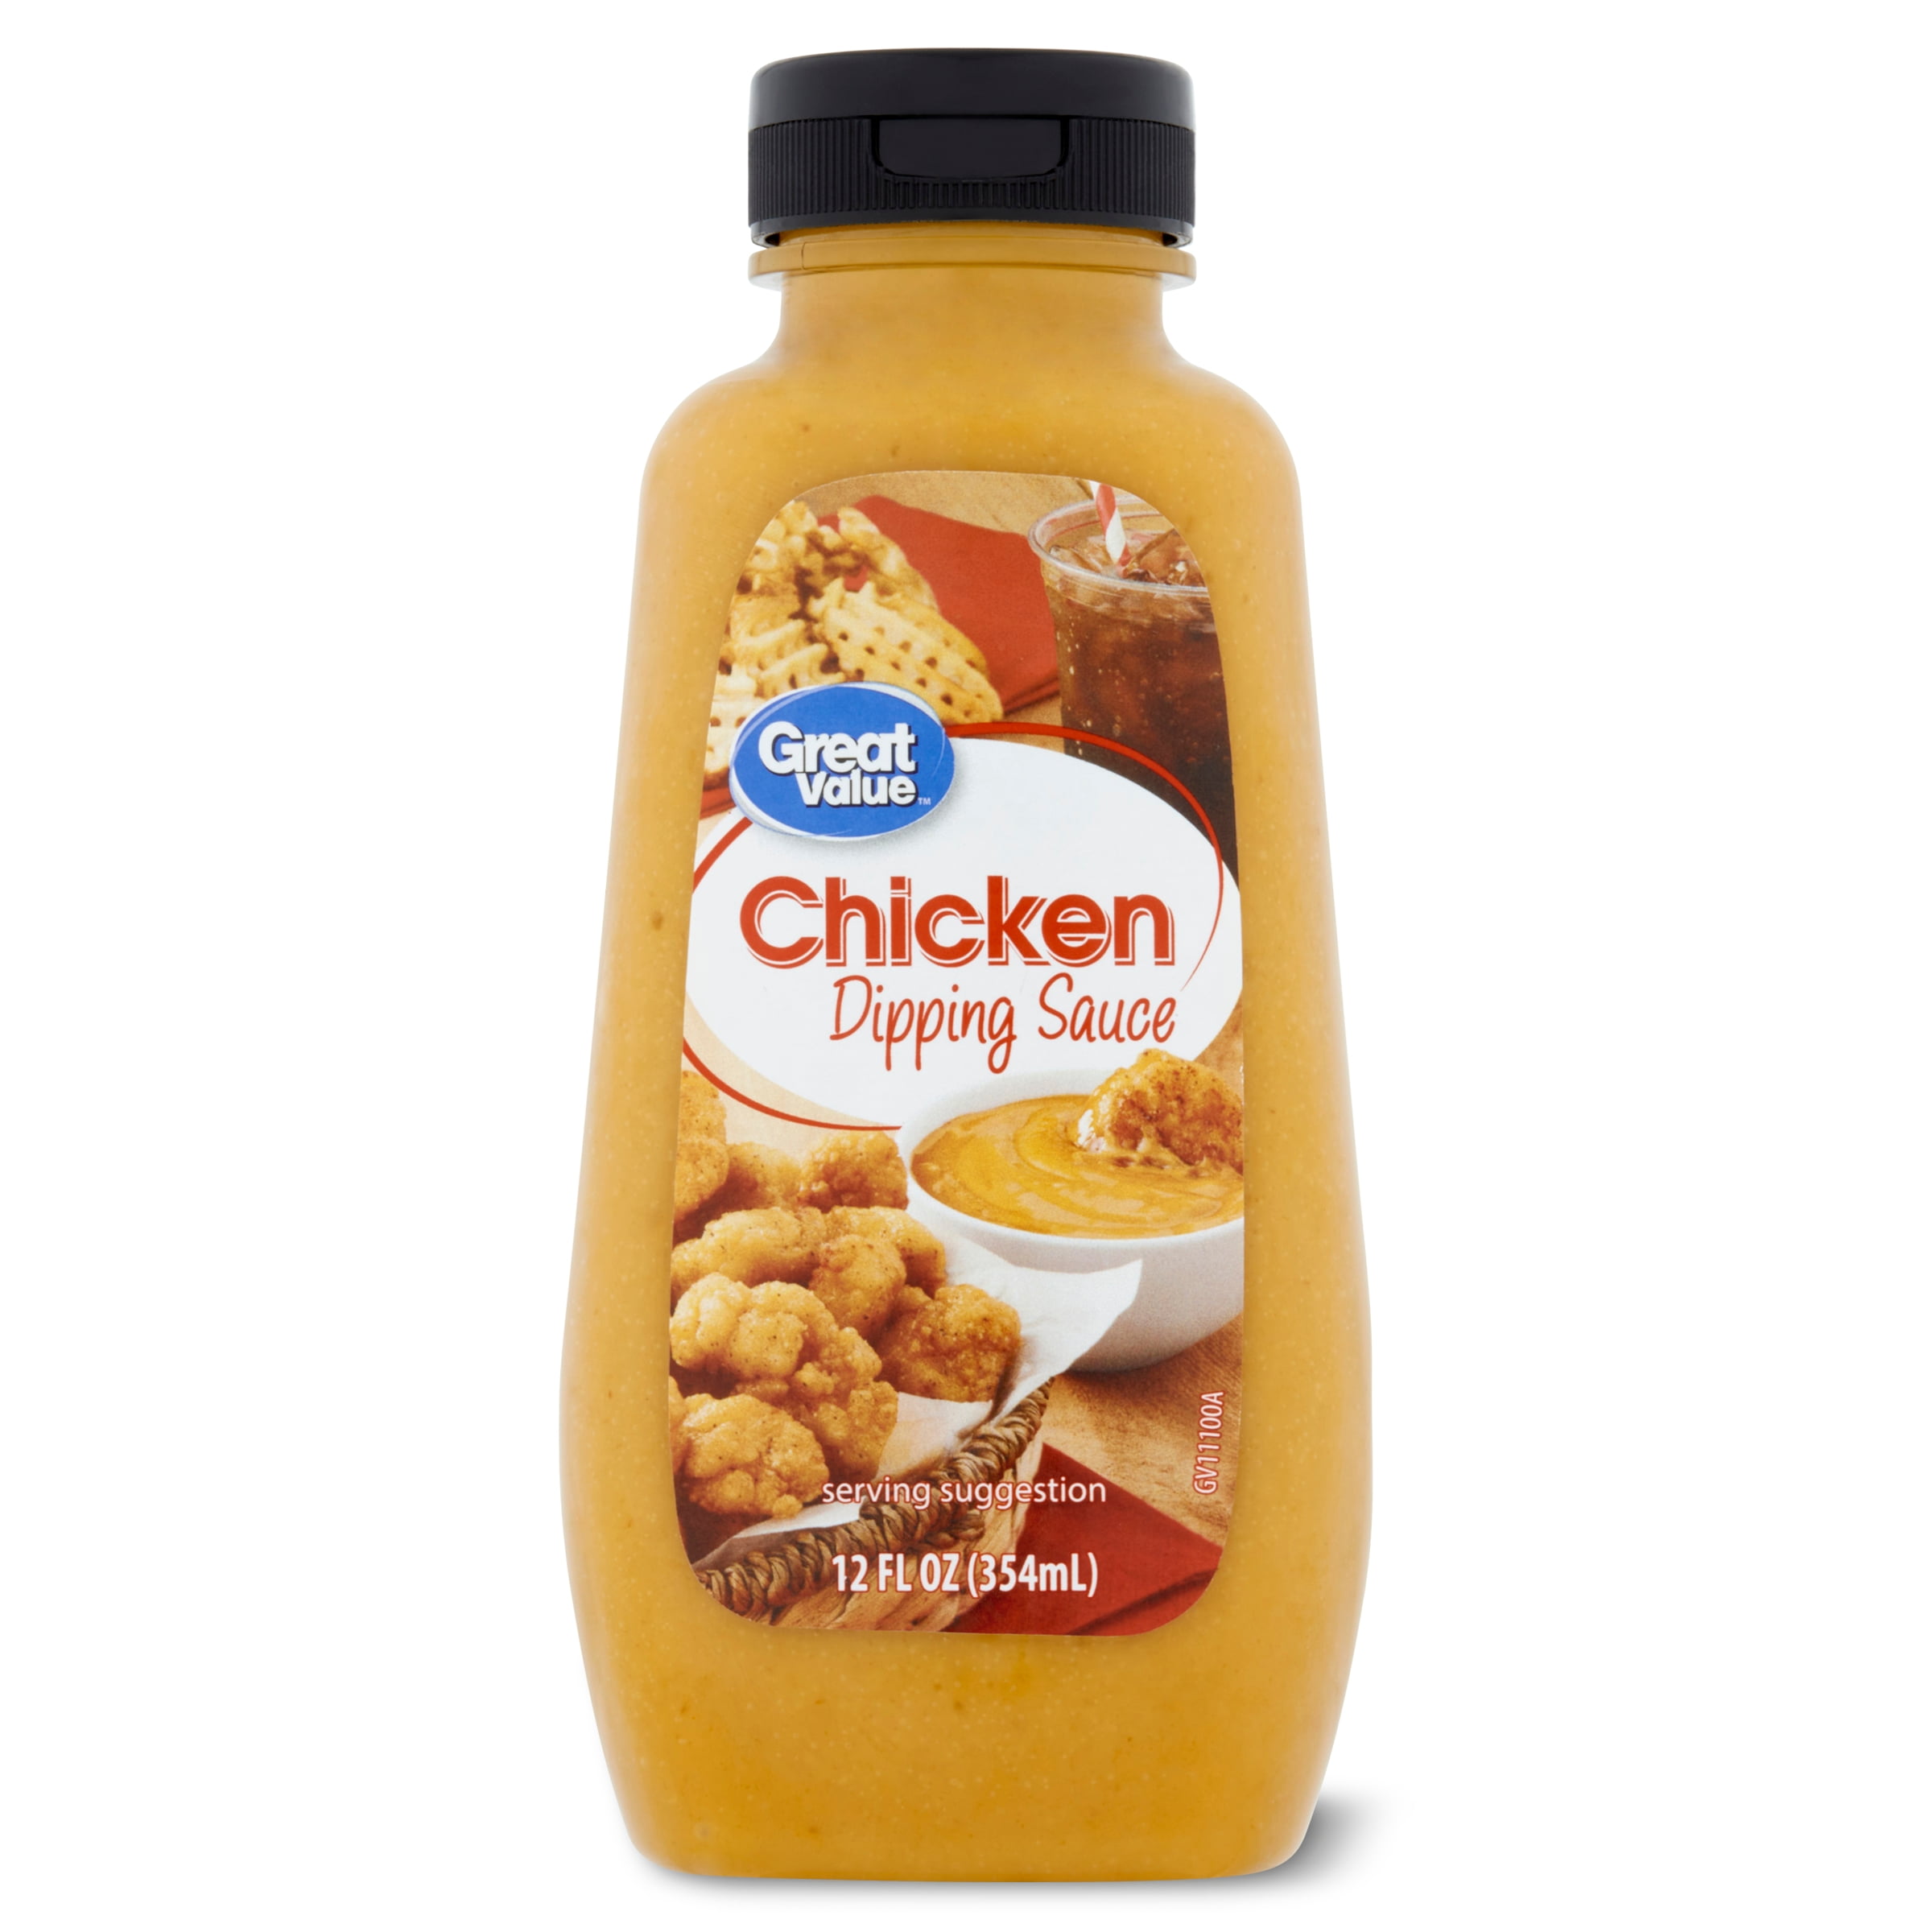 Great Value Restaurant Style Chicken Dipping Sauce, 12 oz Squeeze Bottle